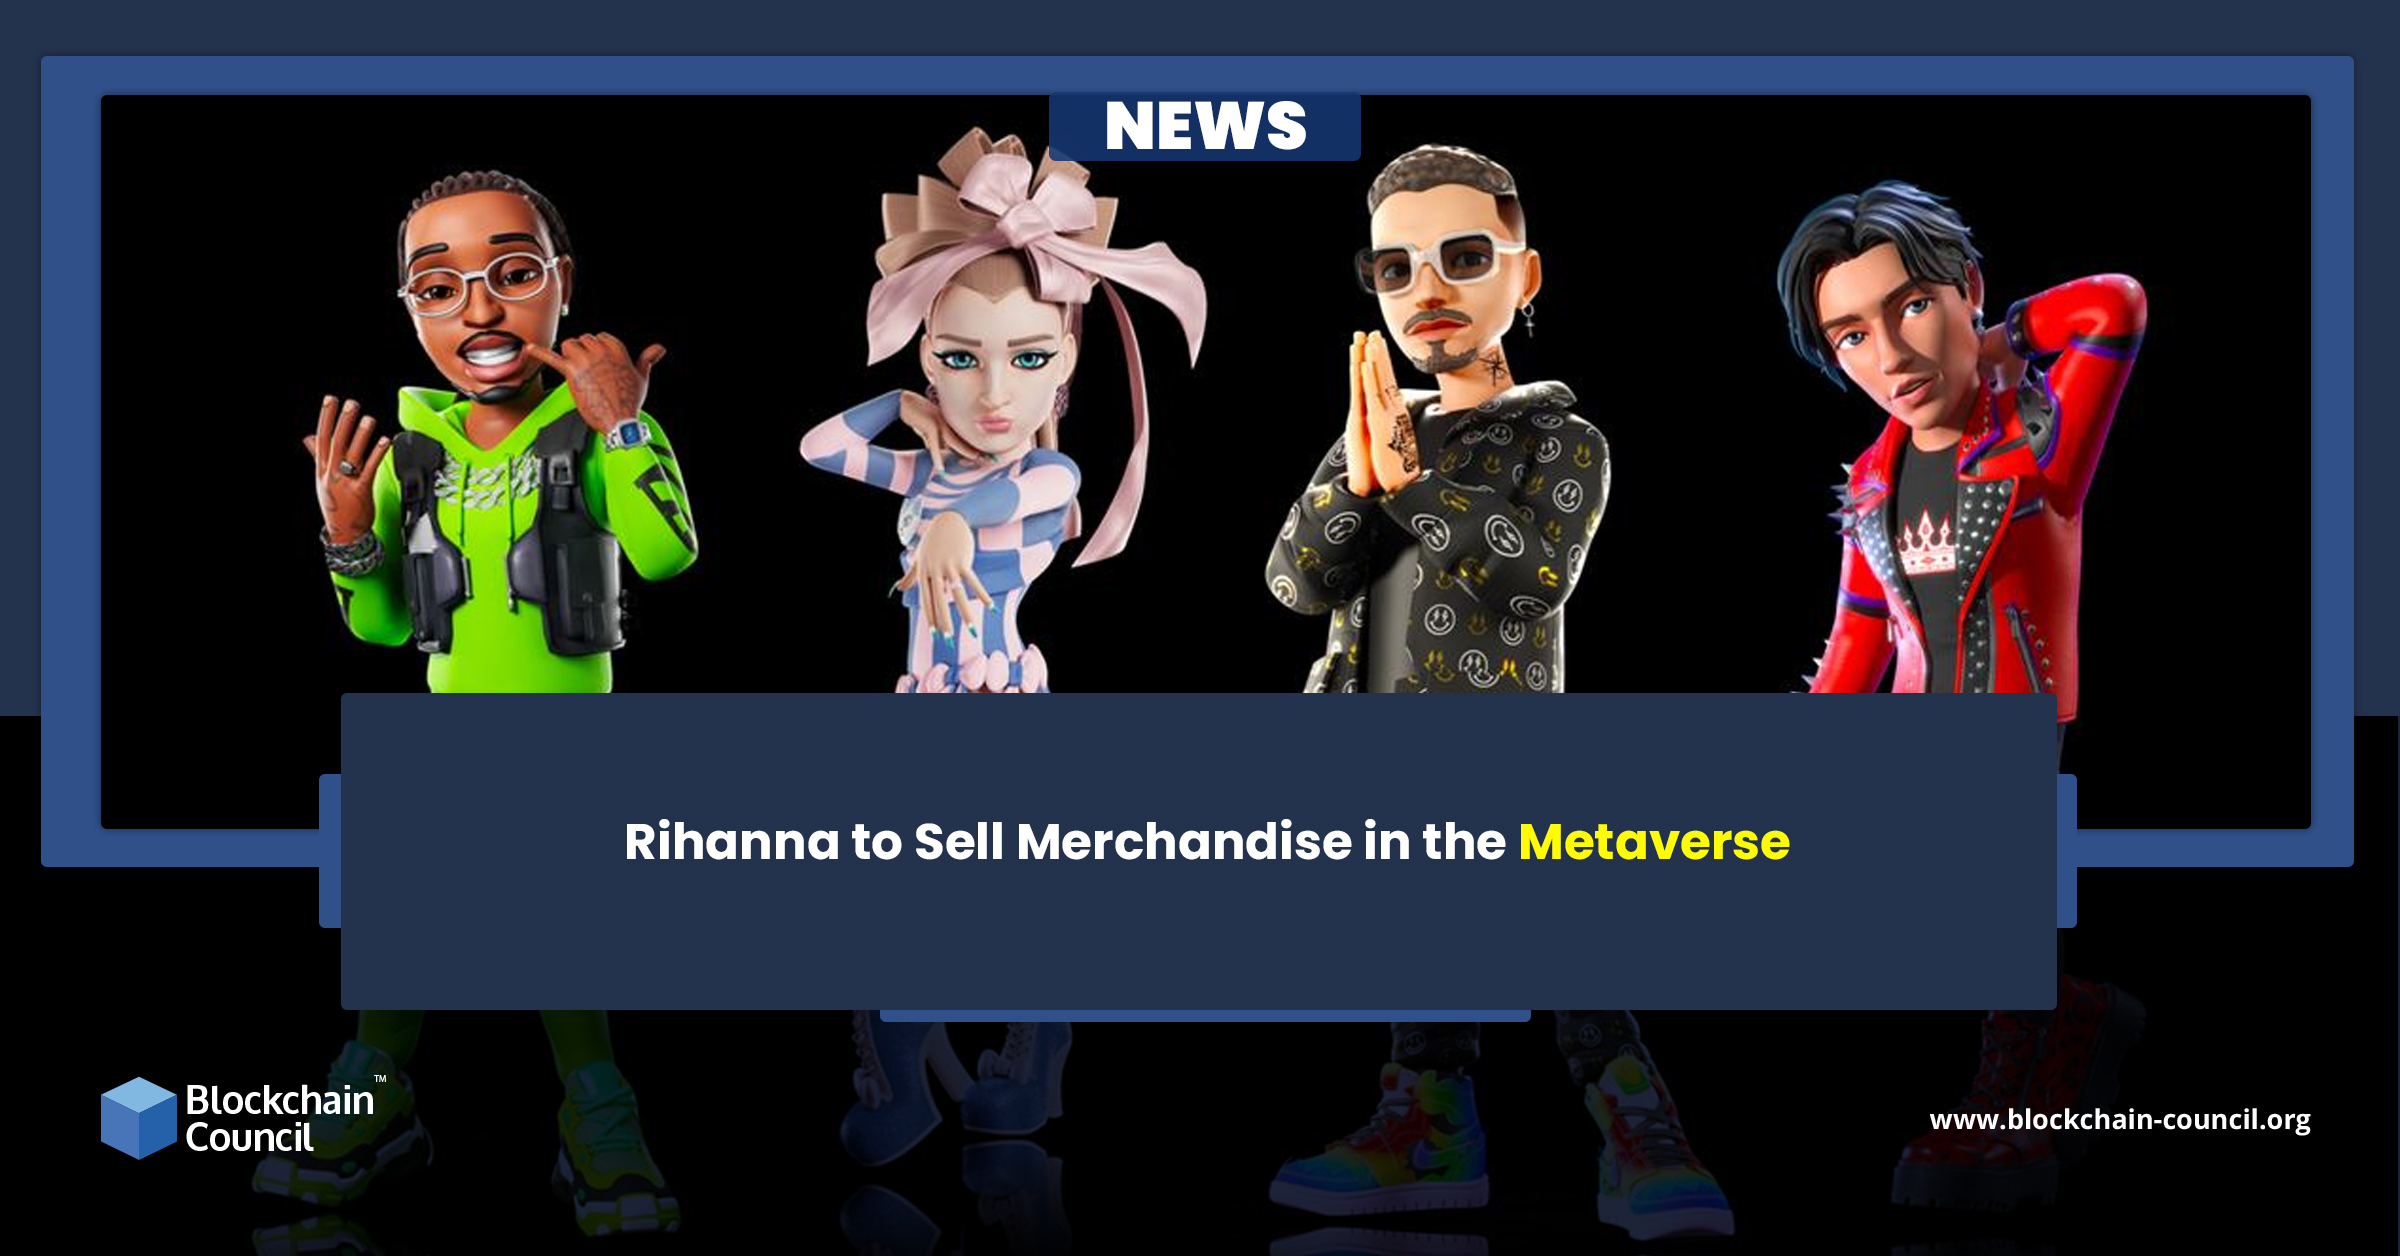 Rihanna to Sell Merchandise in the Metaverse